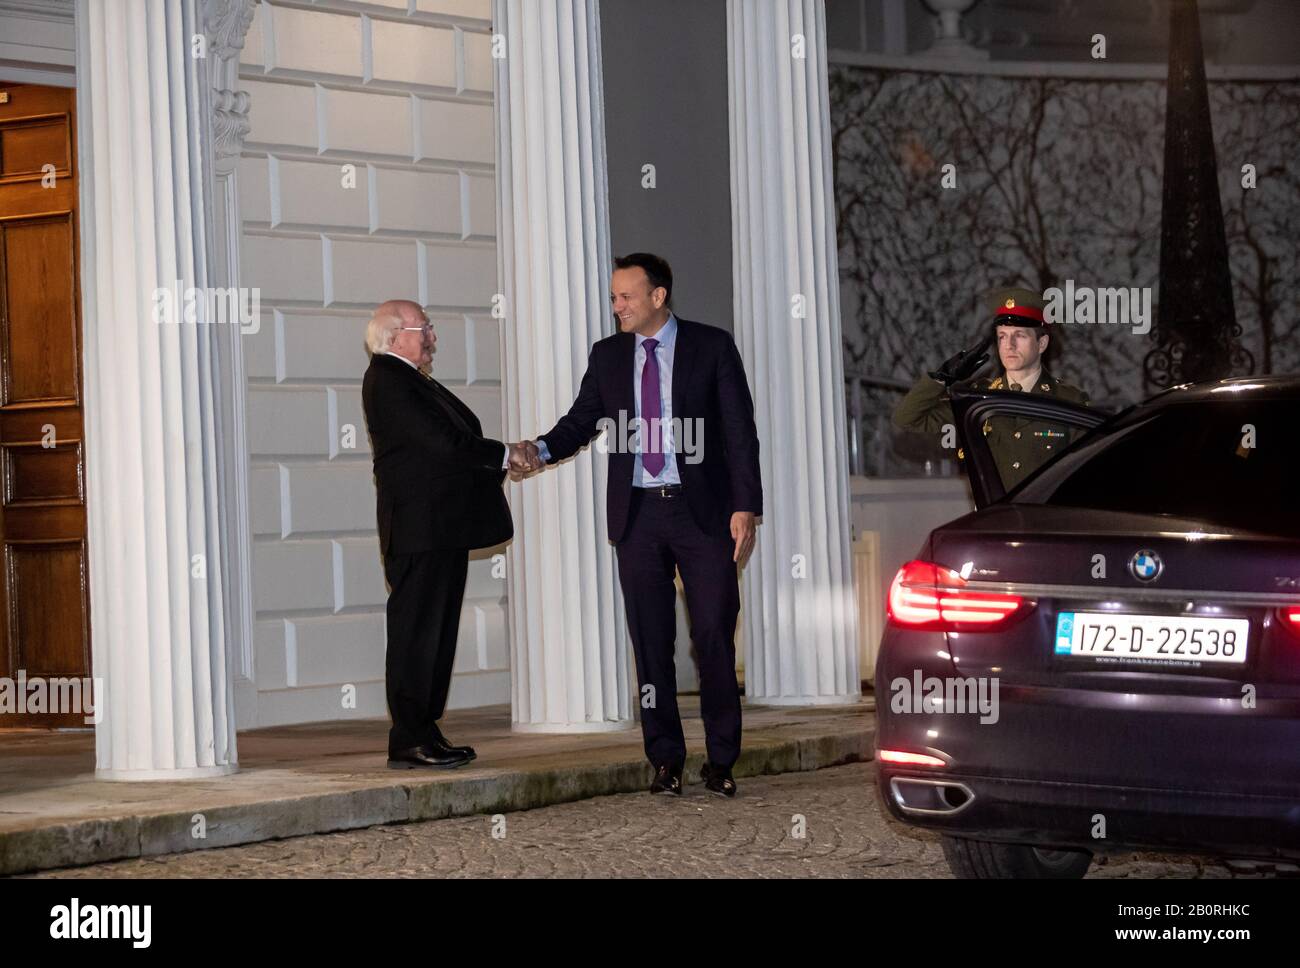 Dublin. 21st Feb, 2020. Irish Prime Minister Leo Varadkar (C) leaves the official residence of the Irish president after tendering his resignation to Irish President Michael D. Higgins (L) in Dublin, Ireland, Feb. 20, 2020. The newly formed lower house of the Irish parliament failed to elect a new prime minister for the country during its first sitting held here on Thursday, reported Irish national radio and television broadcaster RTE. Credit: Xinhua/Alamy Live News Stock Photo